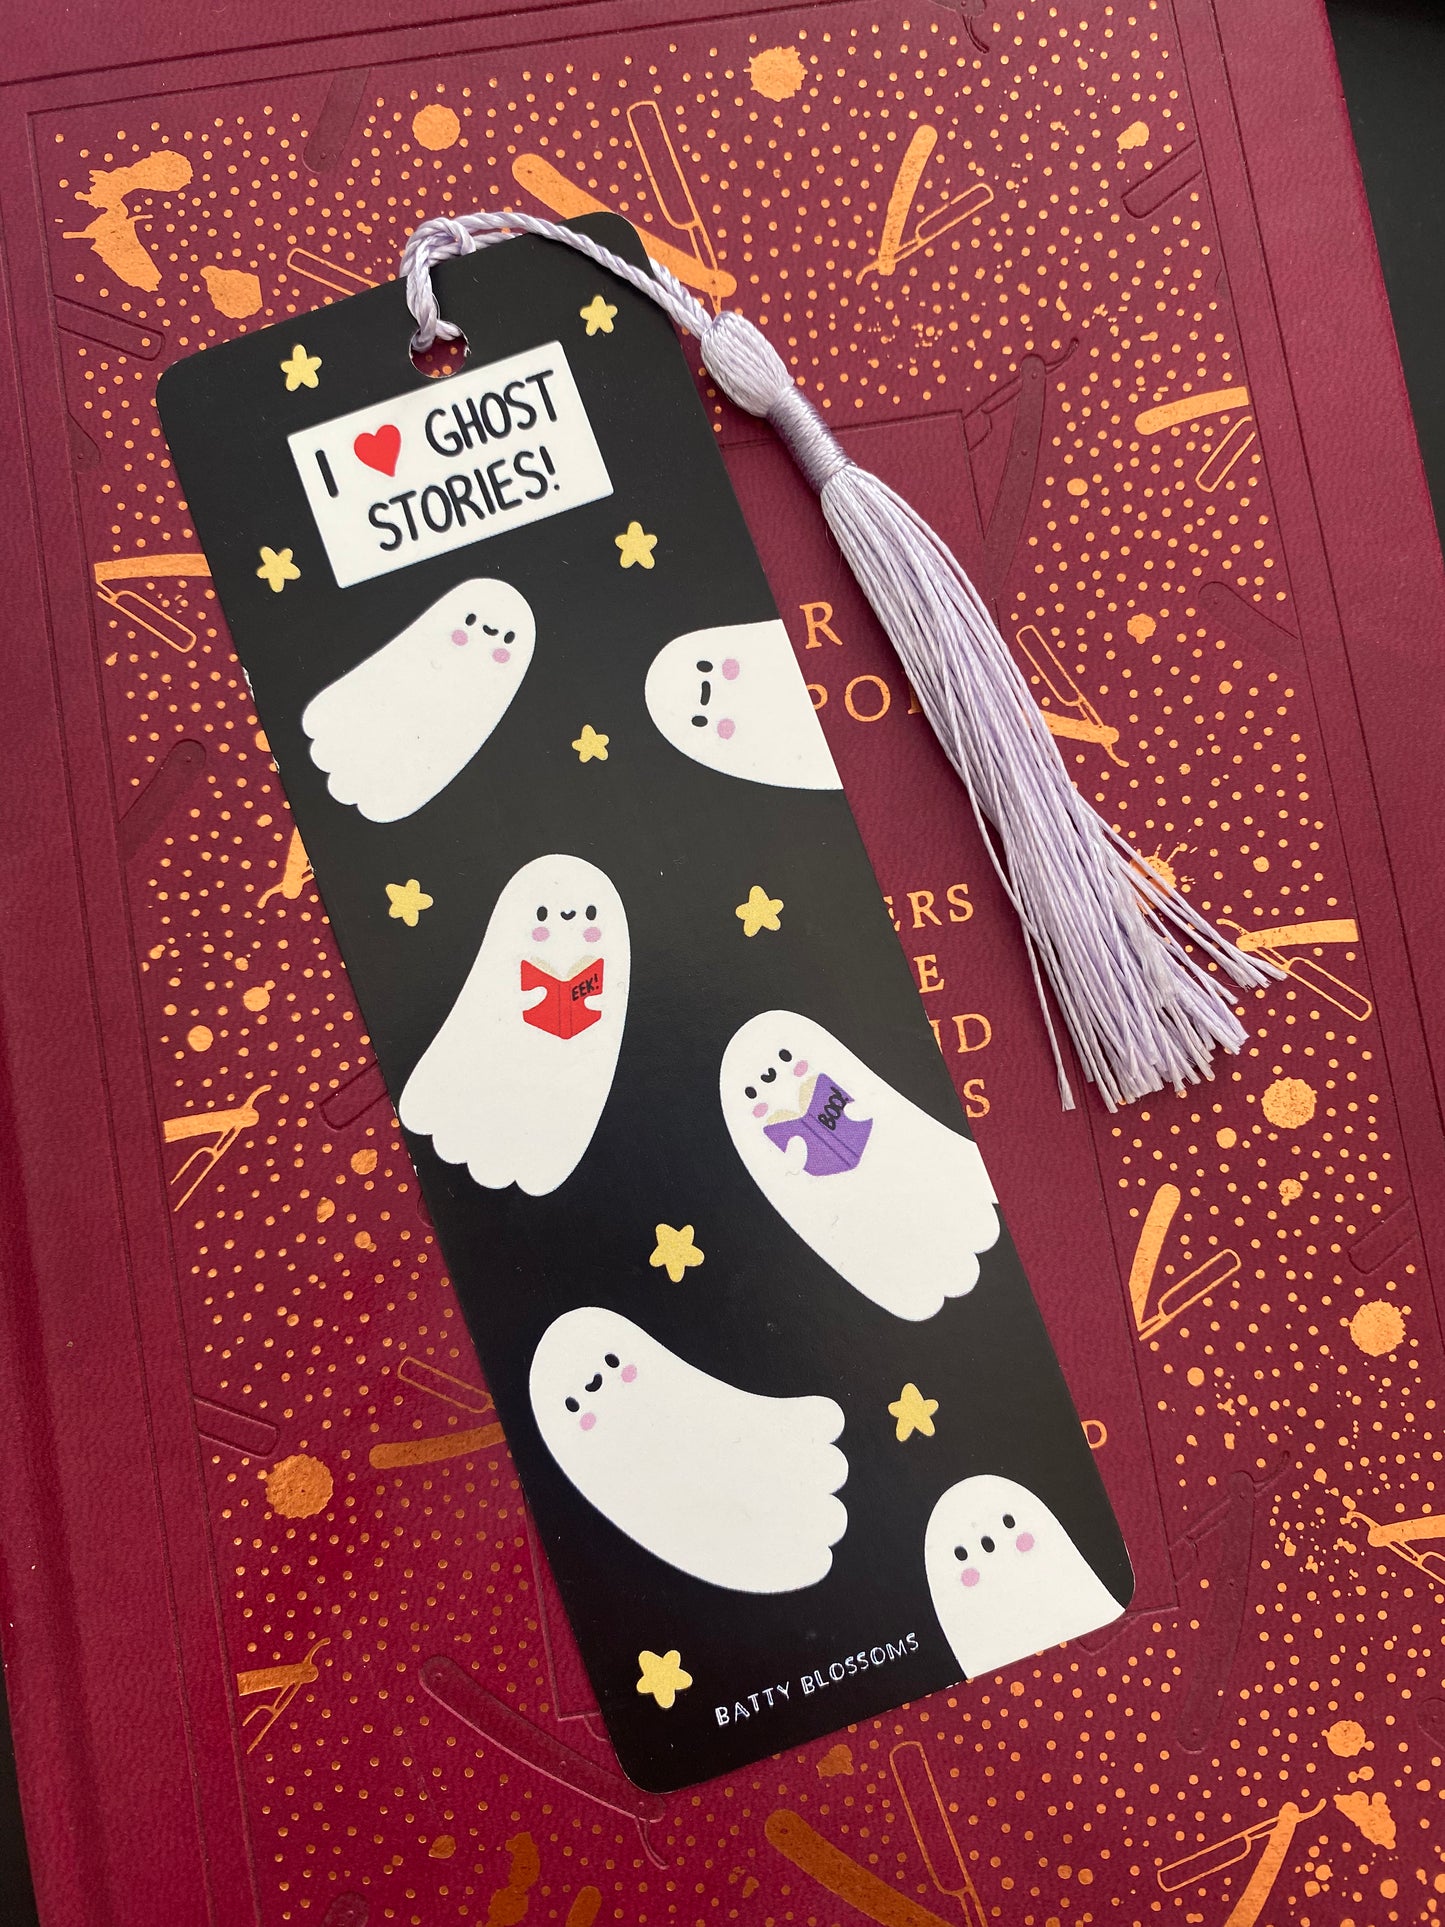 I Love Ghost Stories bookmark